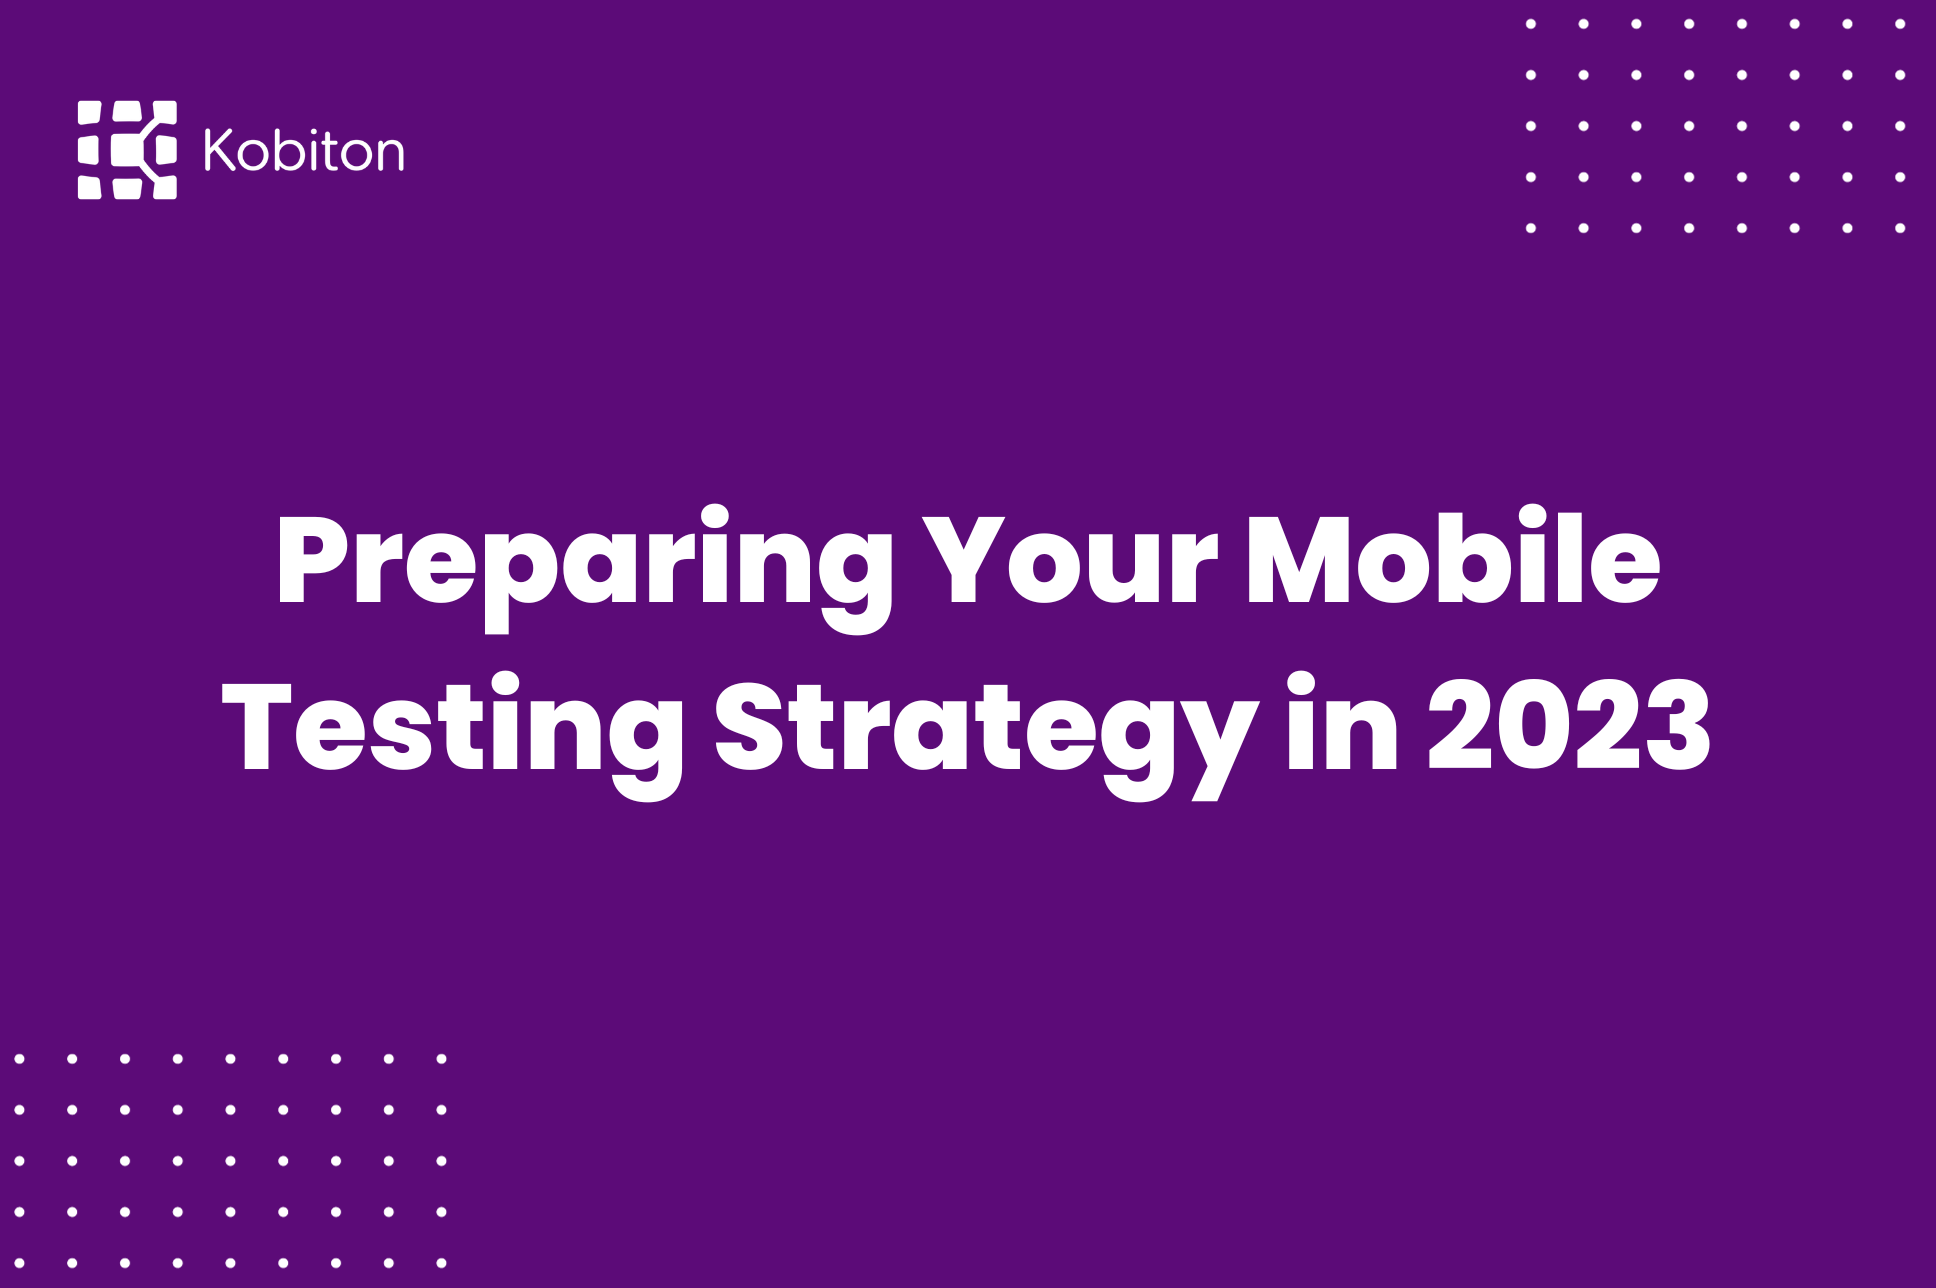 Preparing Your Mobile Testing Strategy in 2023